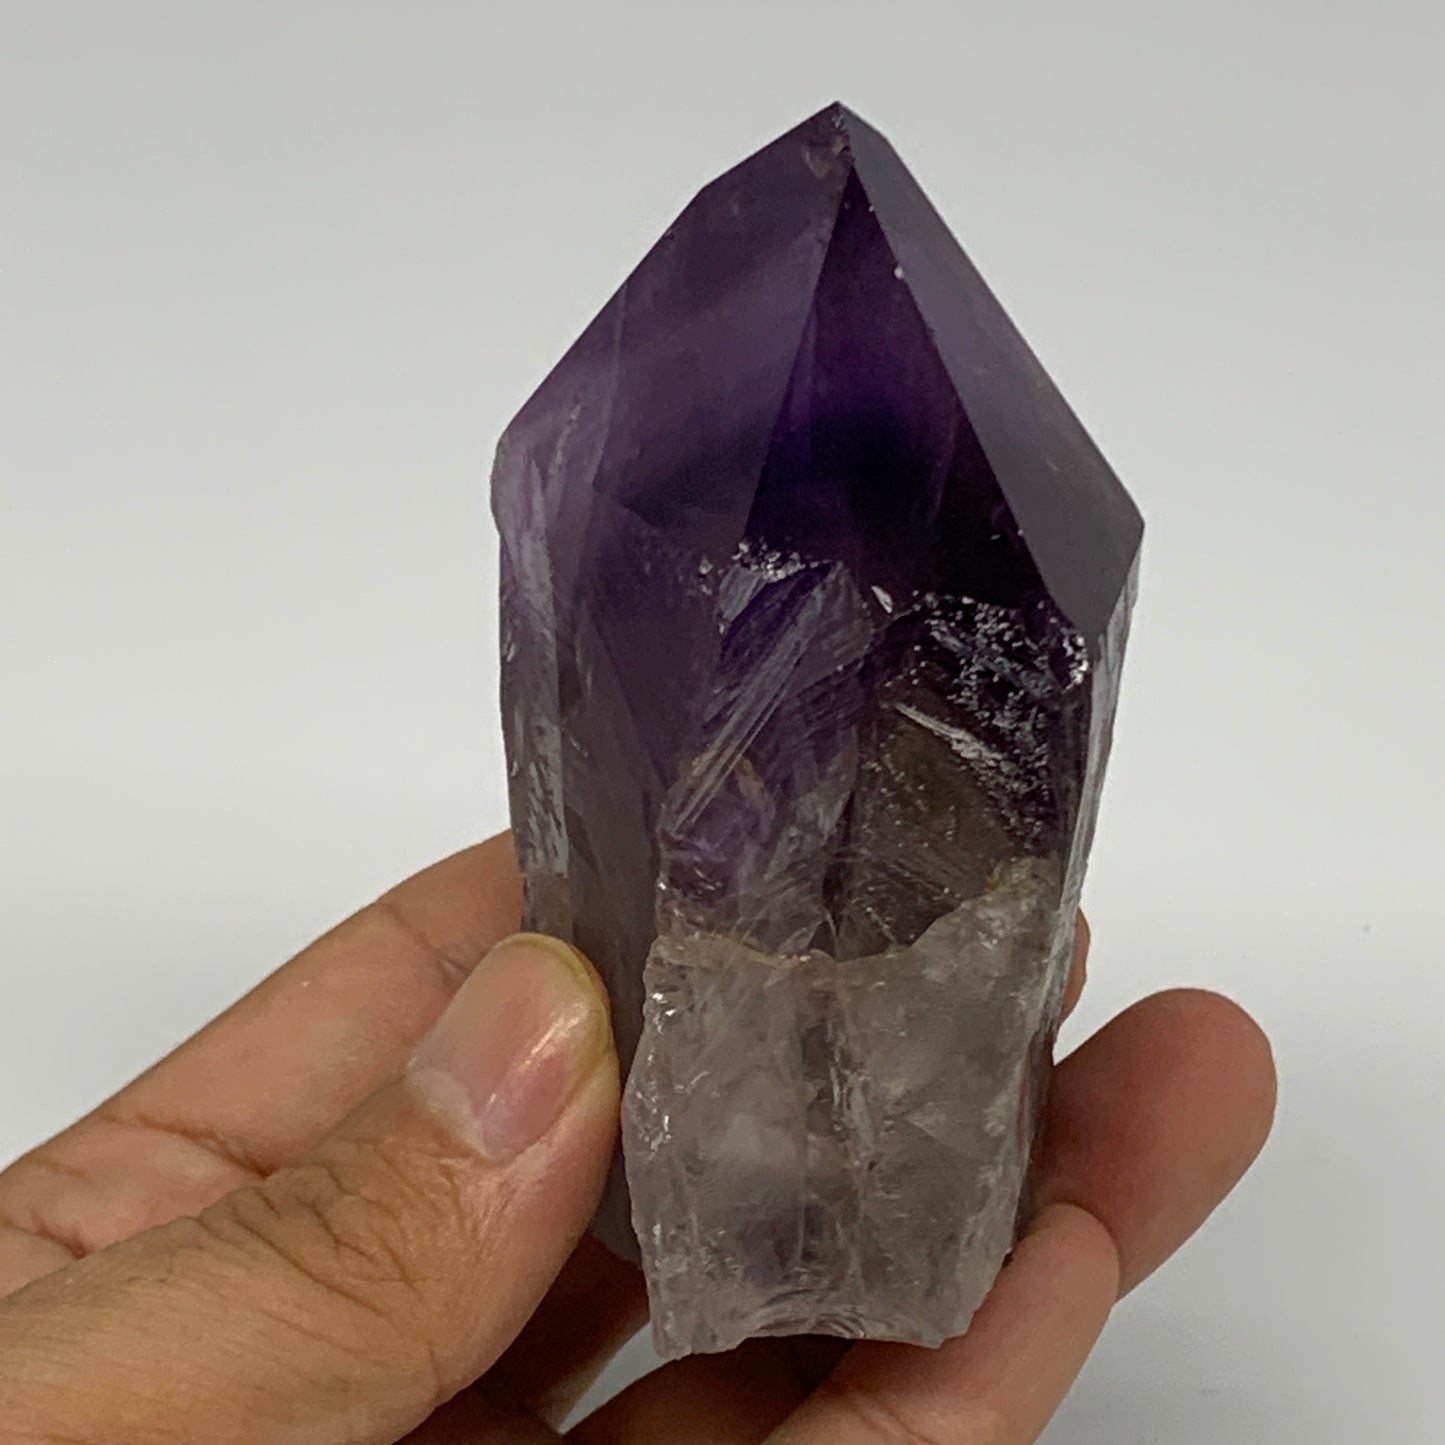 228.8g,3.2"x1.9"x1.6", Amethyst Point Polished Rough lower part Stands, B19139